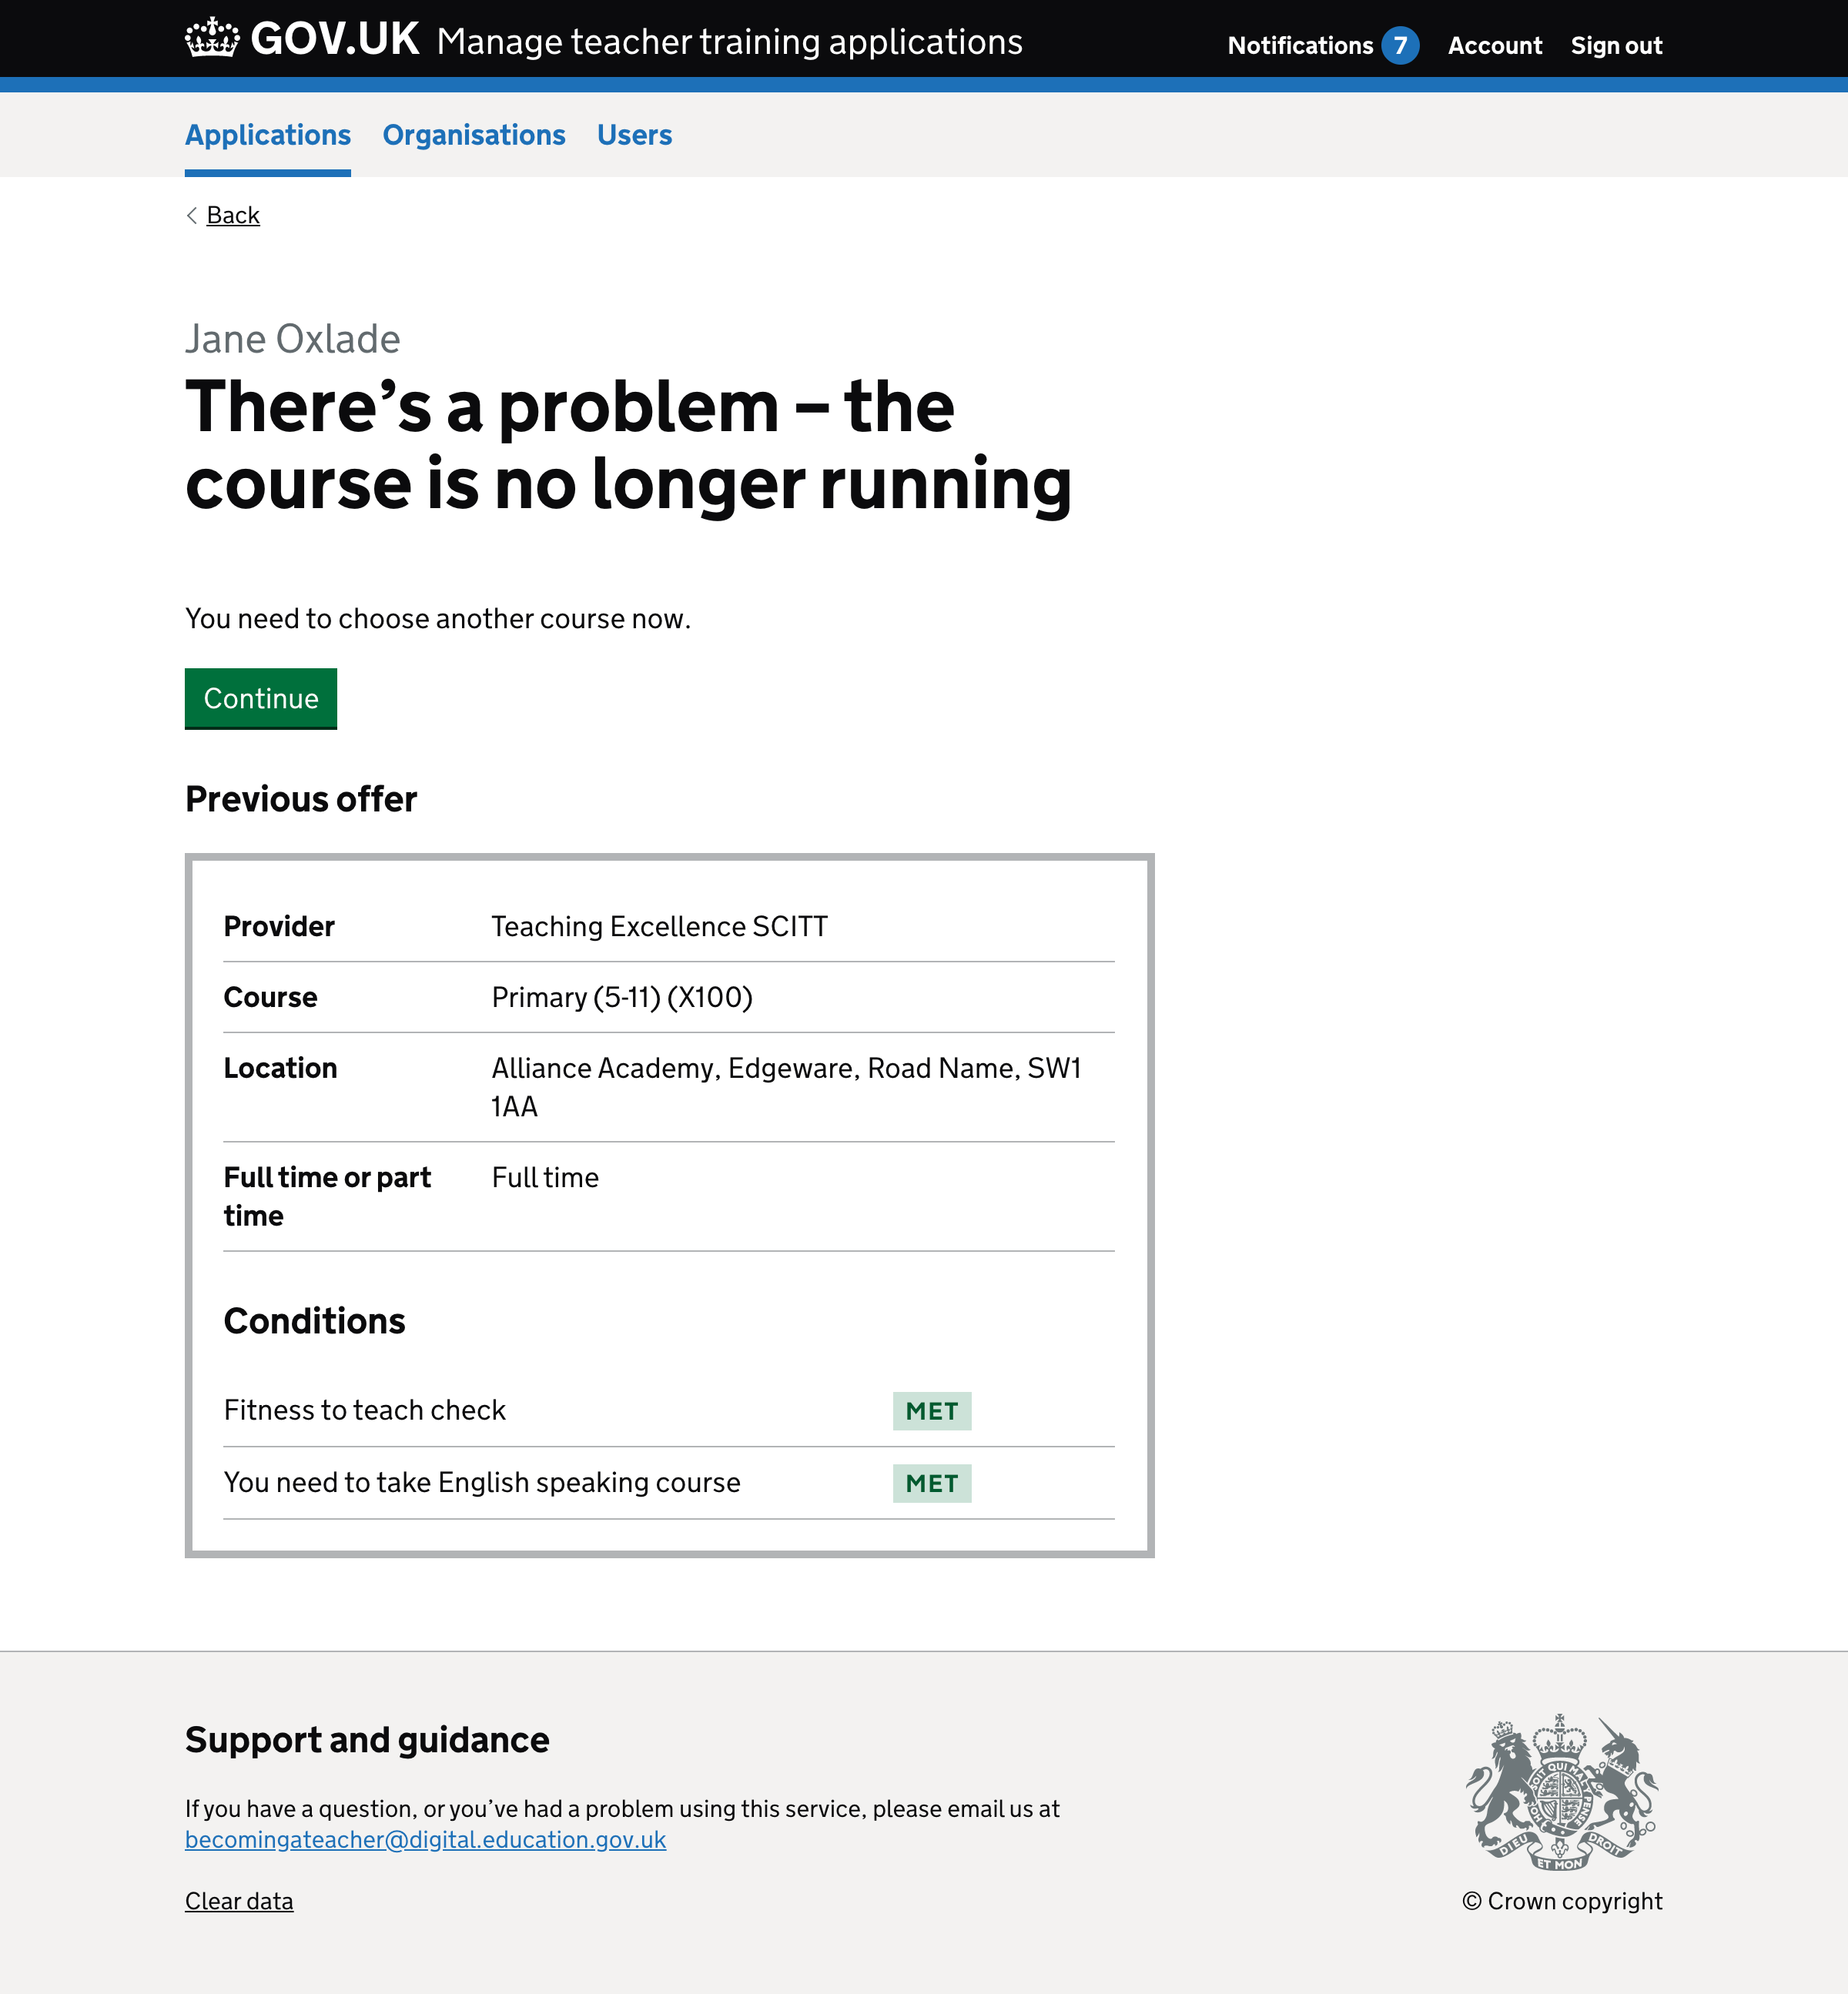 Screenshot of page with title ‘There’s a problem – the course is no longer running’.